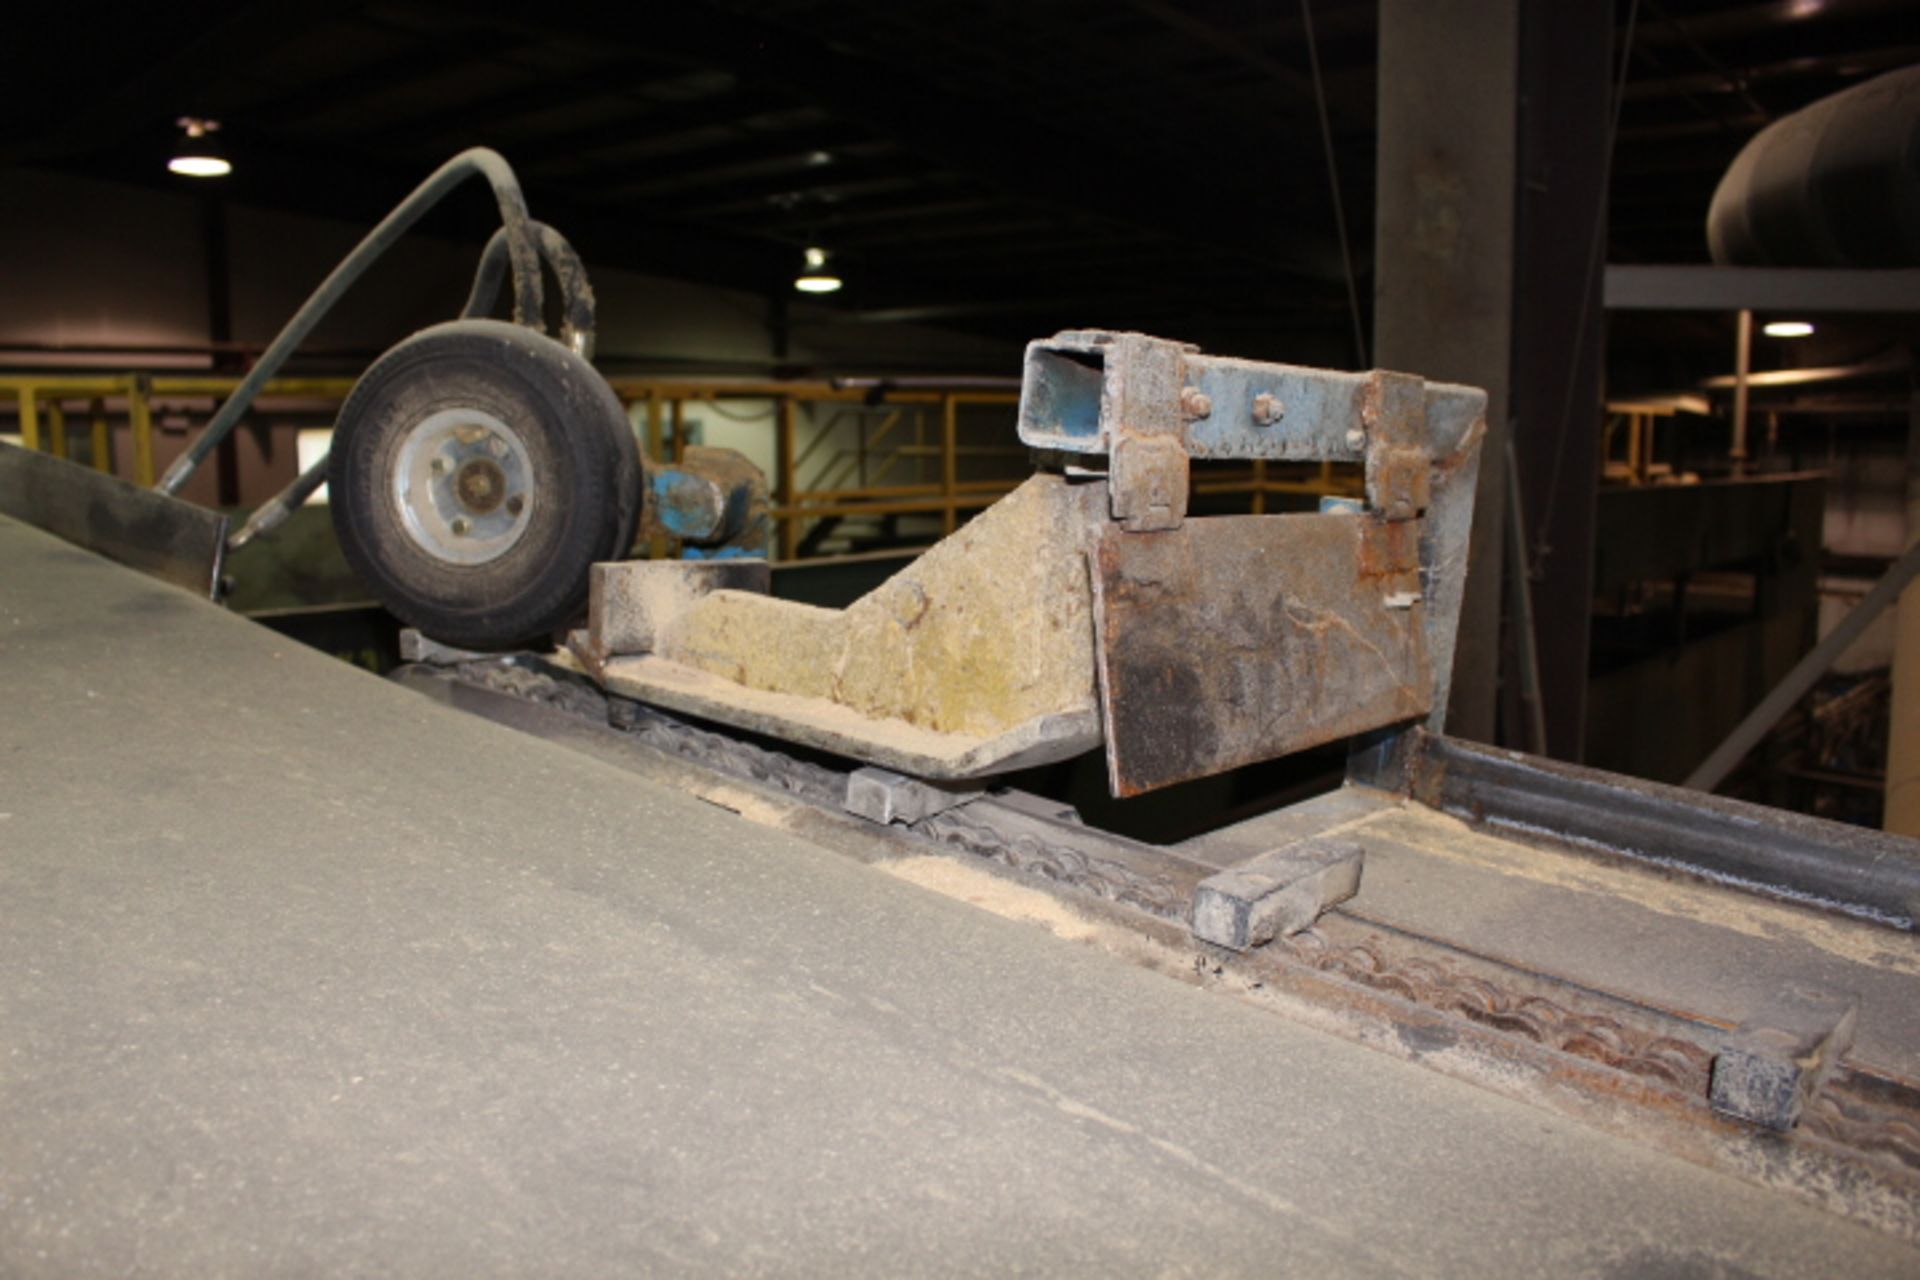 25.5" X 52' OUTFEED CONVEYOR, 24" POWER ROLLS, ASSET NO. 4Ml, 7.5HP MOTOR & RADICON, C/W LUGGED SIDE - Image 2 of 2